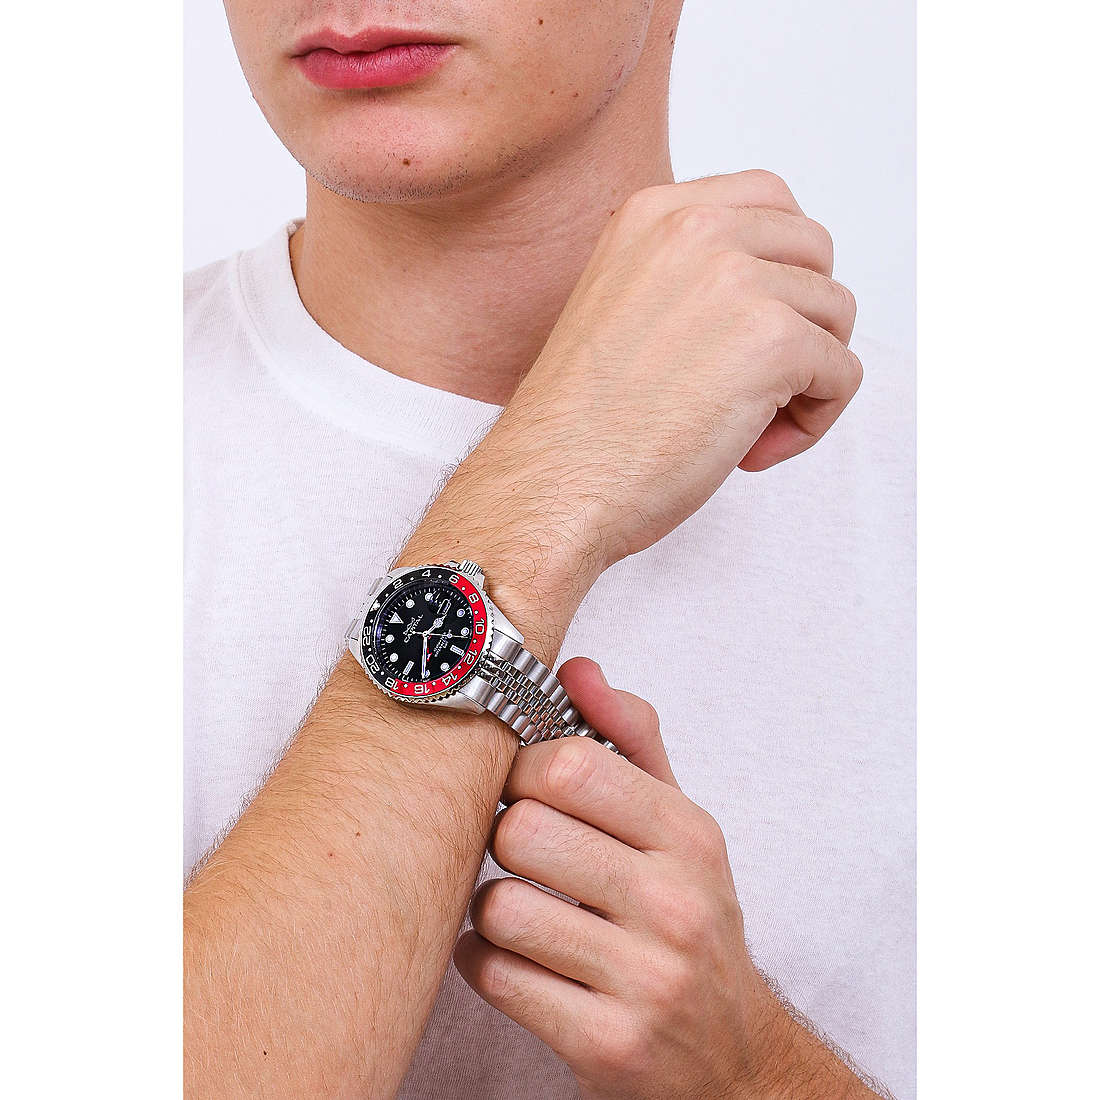 Capital only time Time For Men man AX297-1 wearing